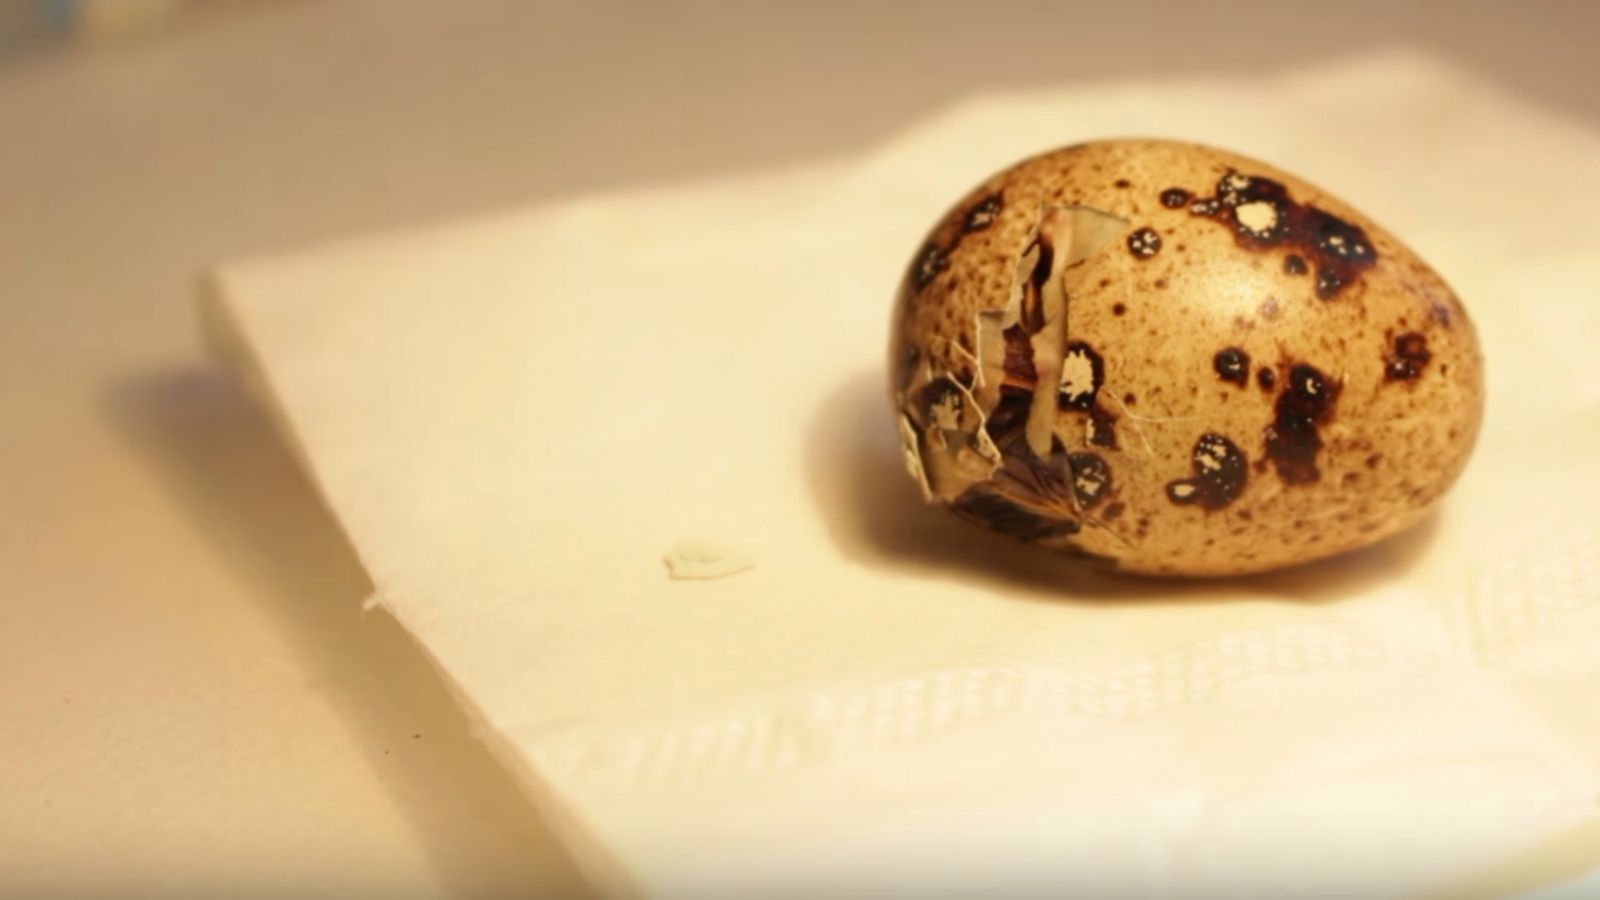 Man Buys Quail Eggs at a Supermarket and Decides to Incubate Them. Then THIS Happens…